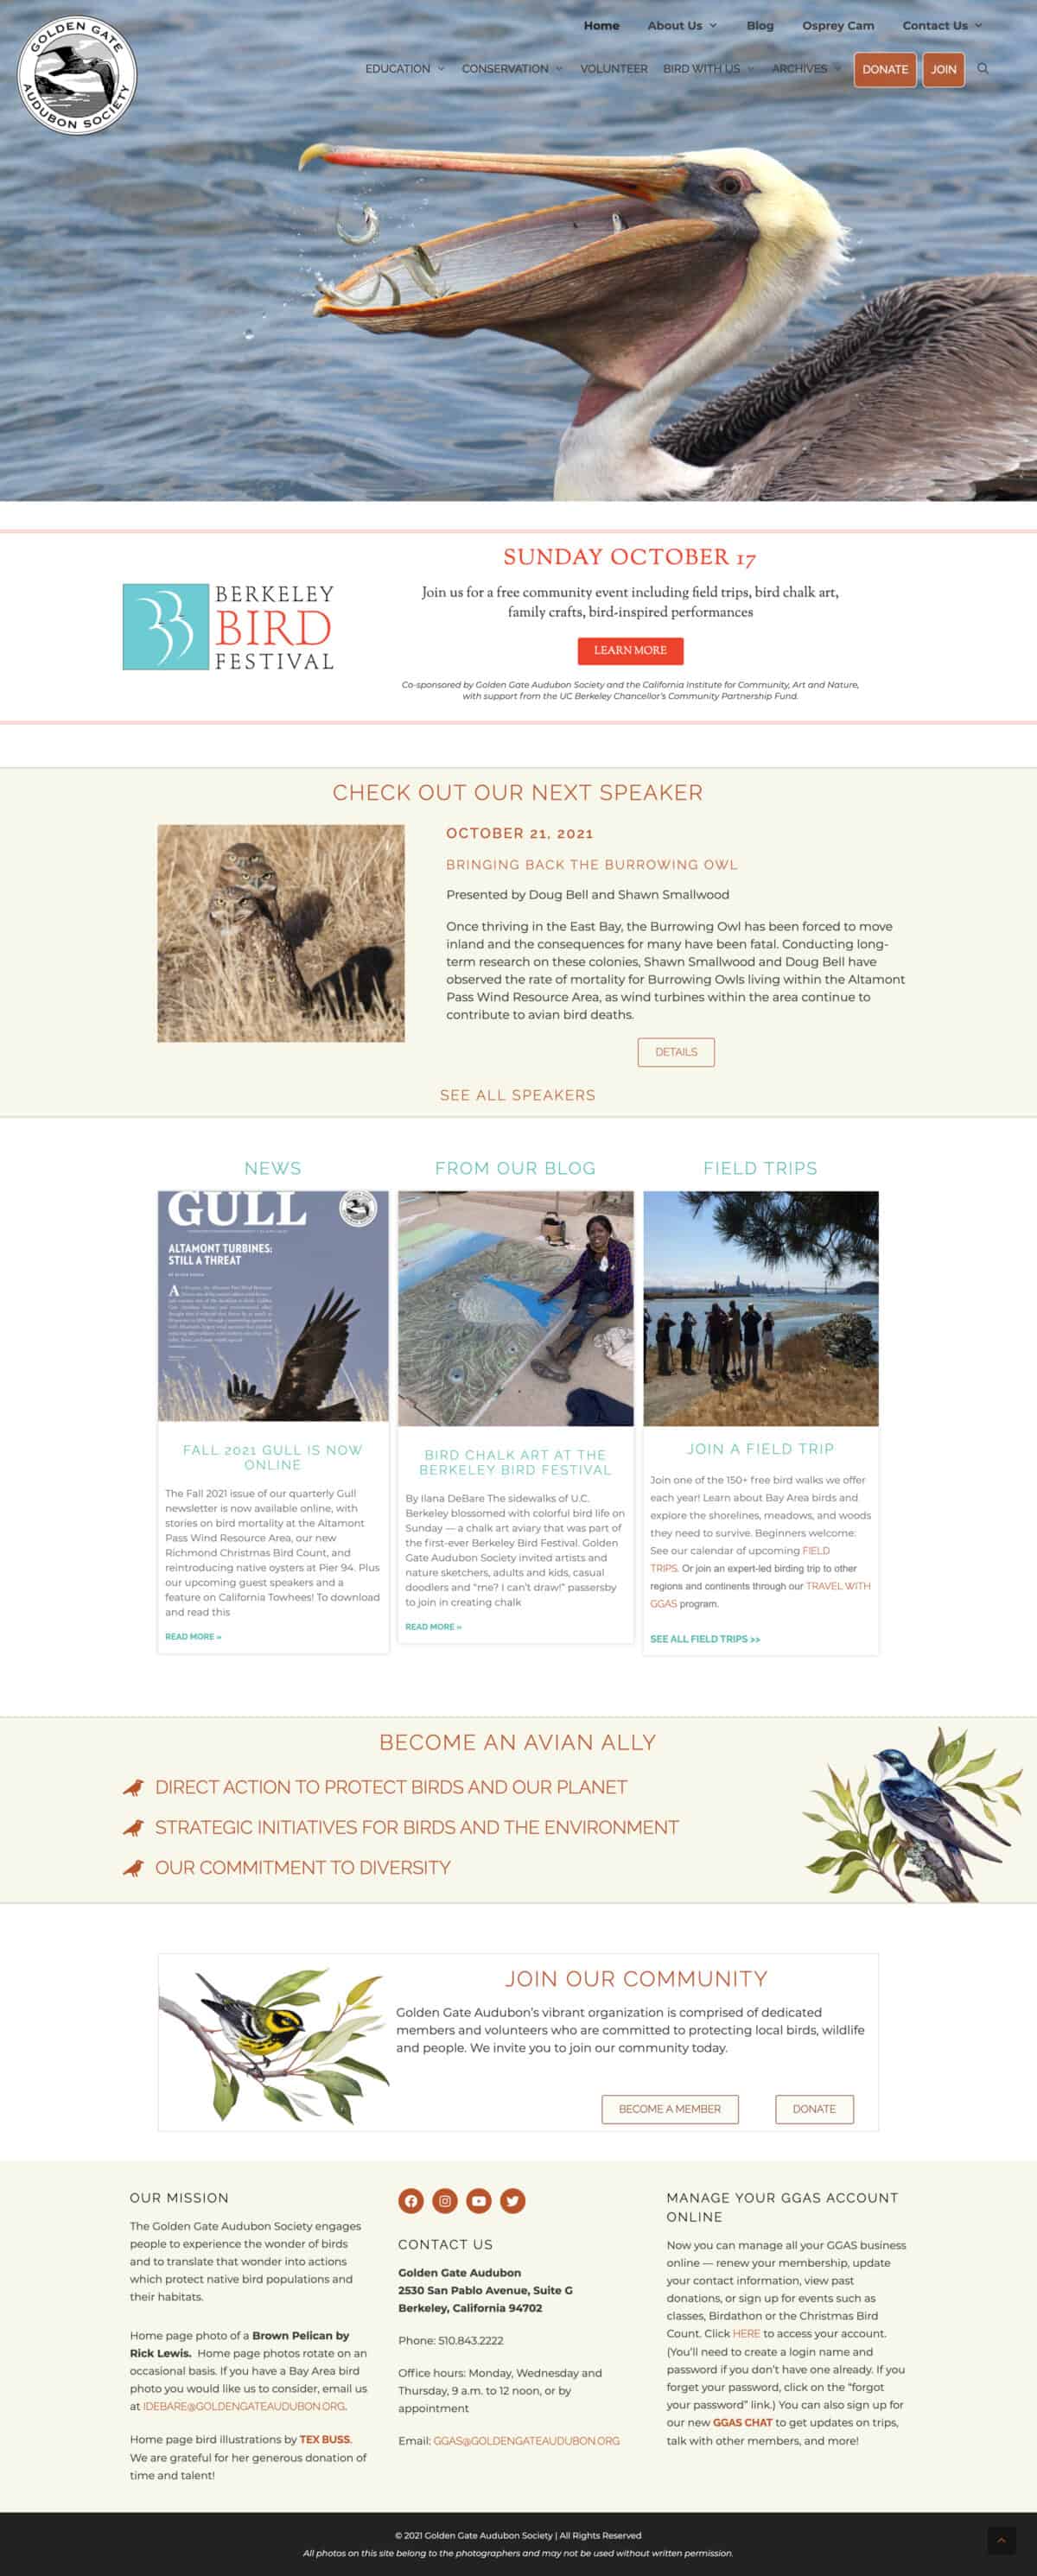 Image of full homepage layout of the Golden Gate Audubon Society website